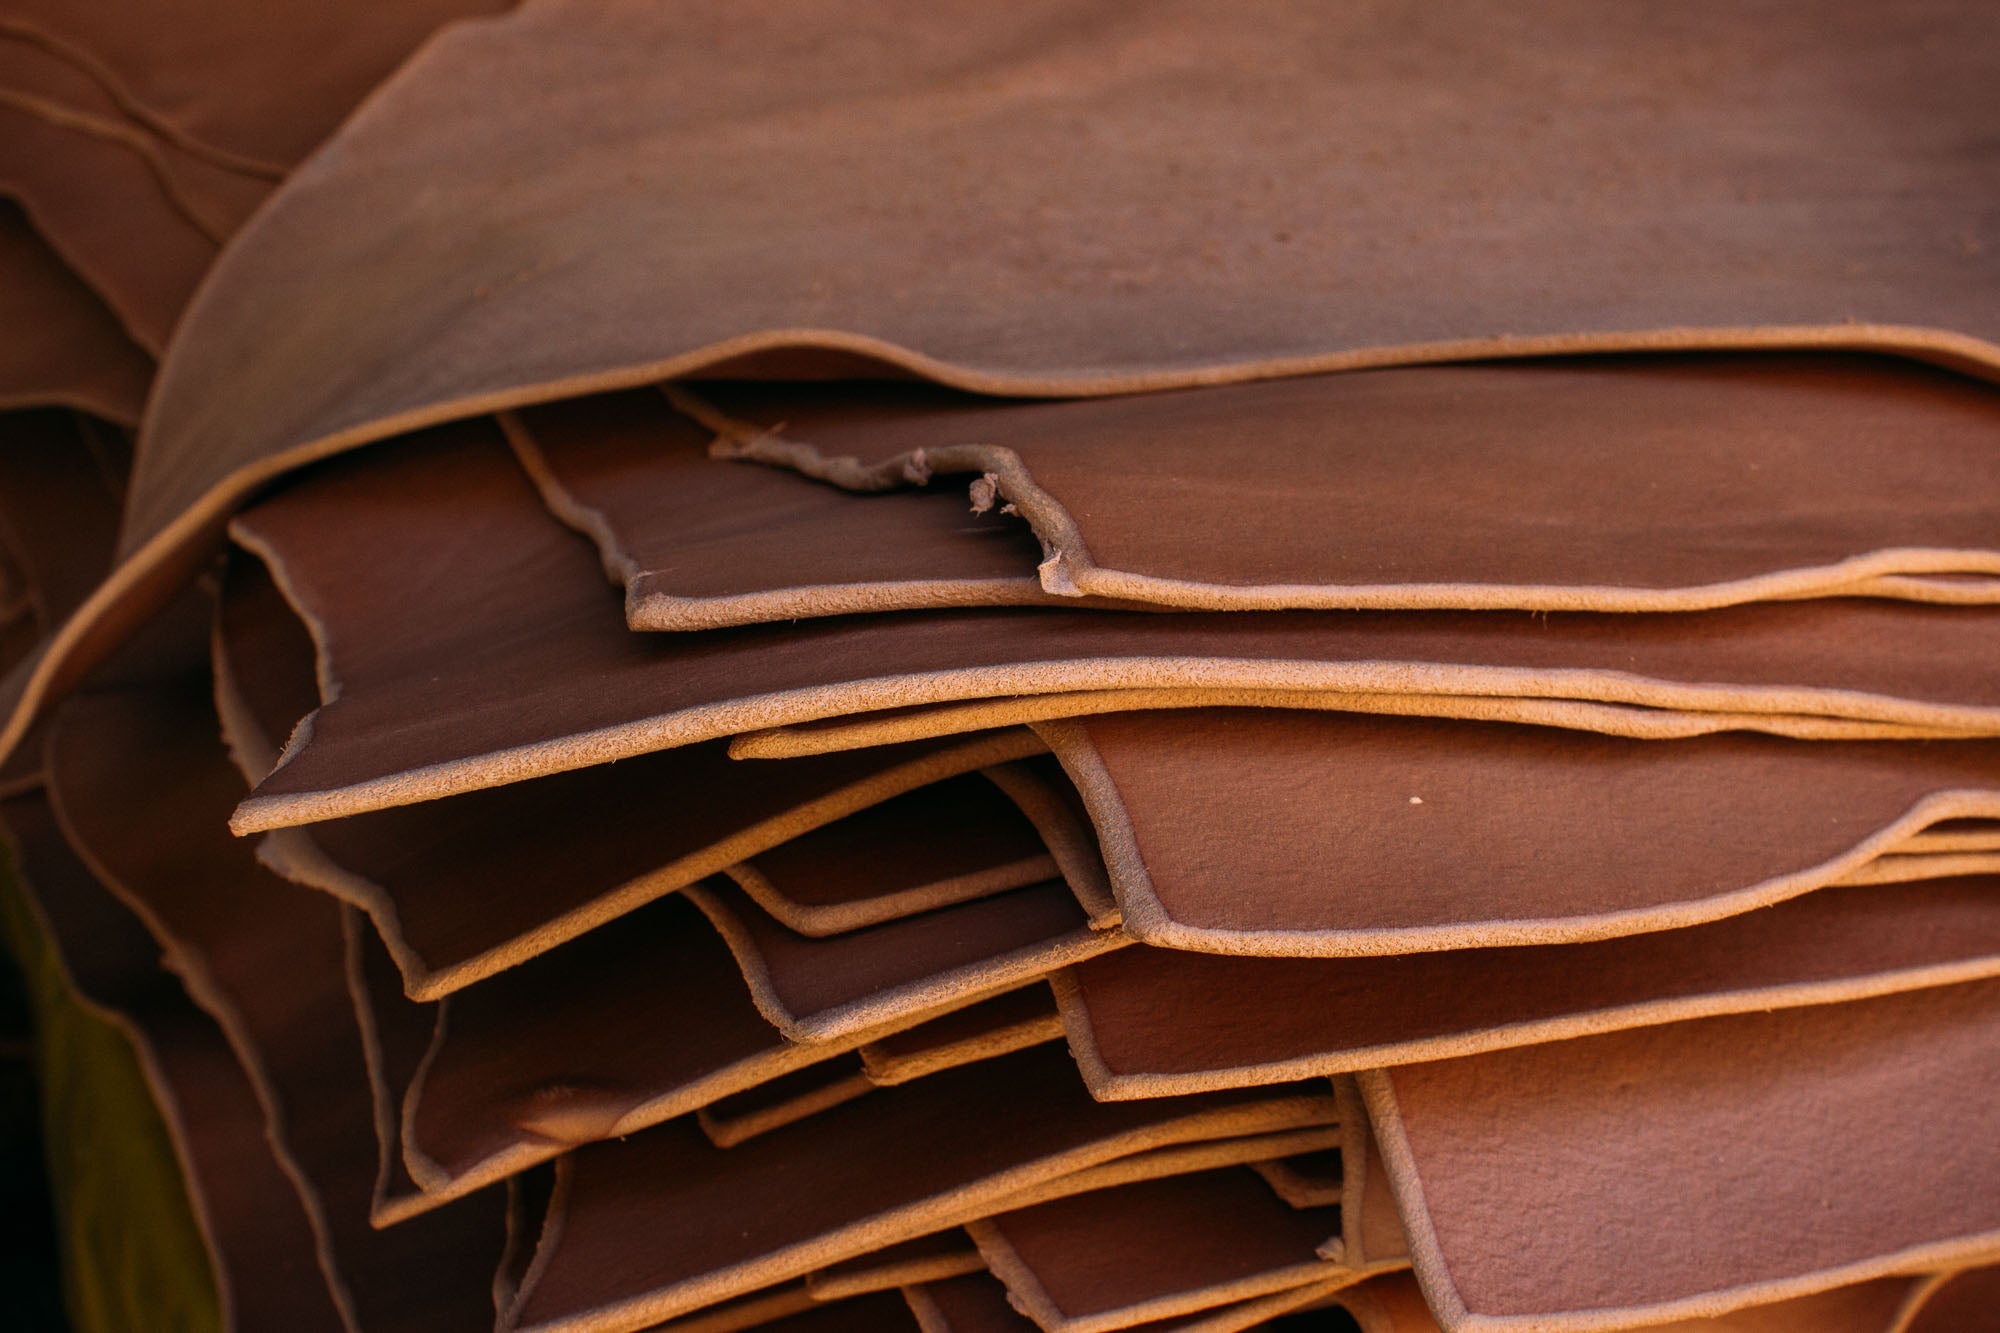 Italian Leather | Everything You Need To Know